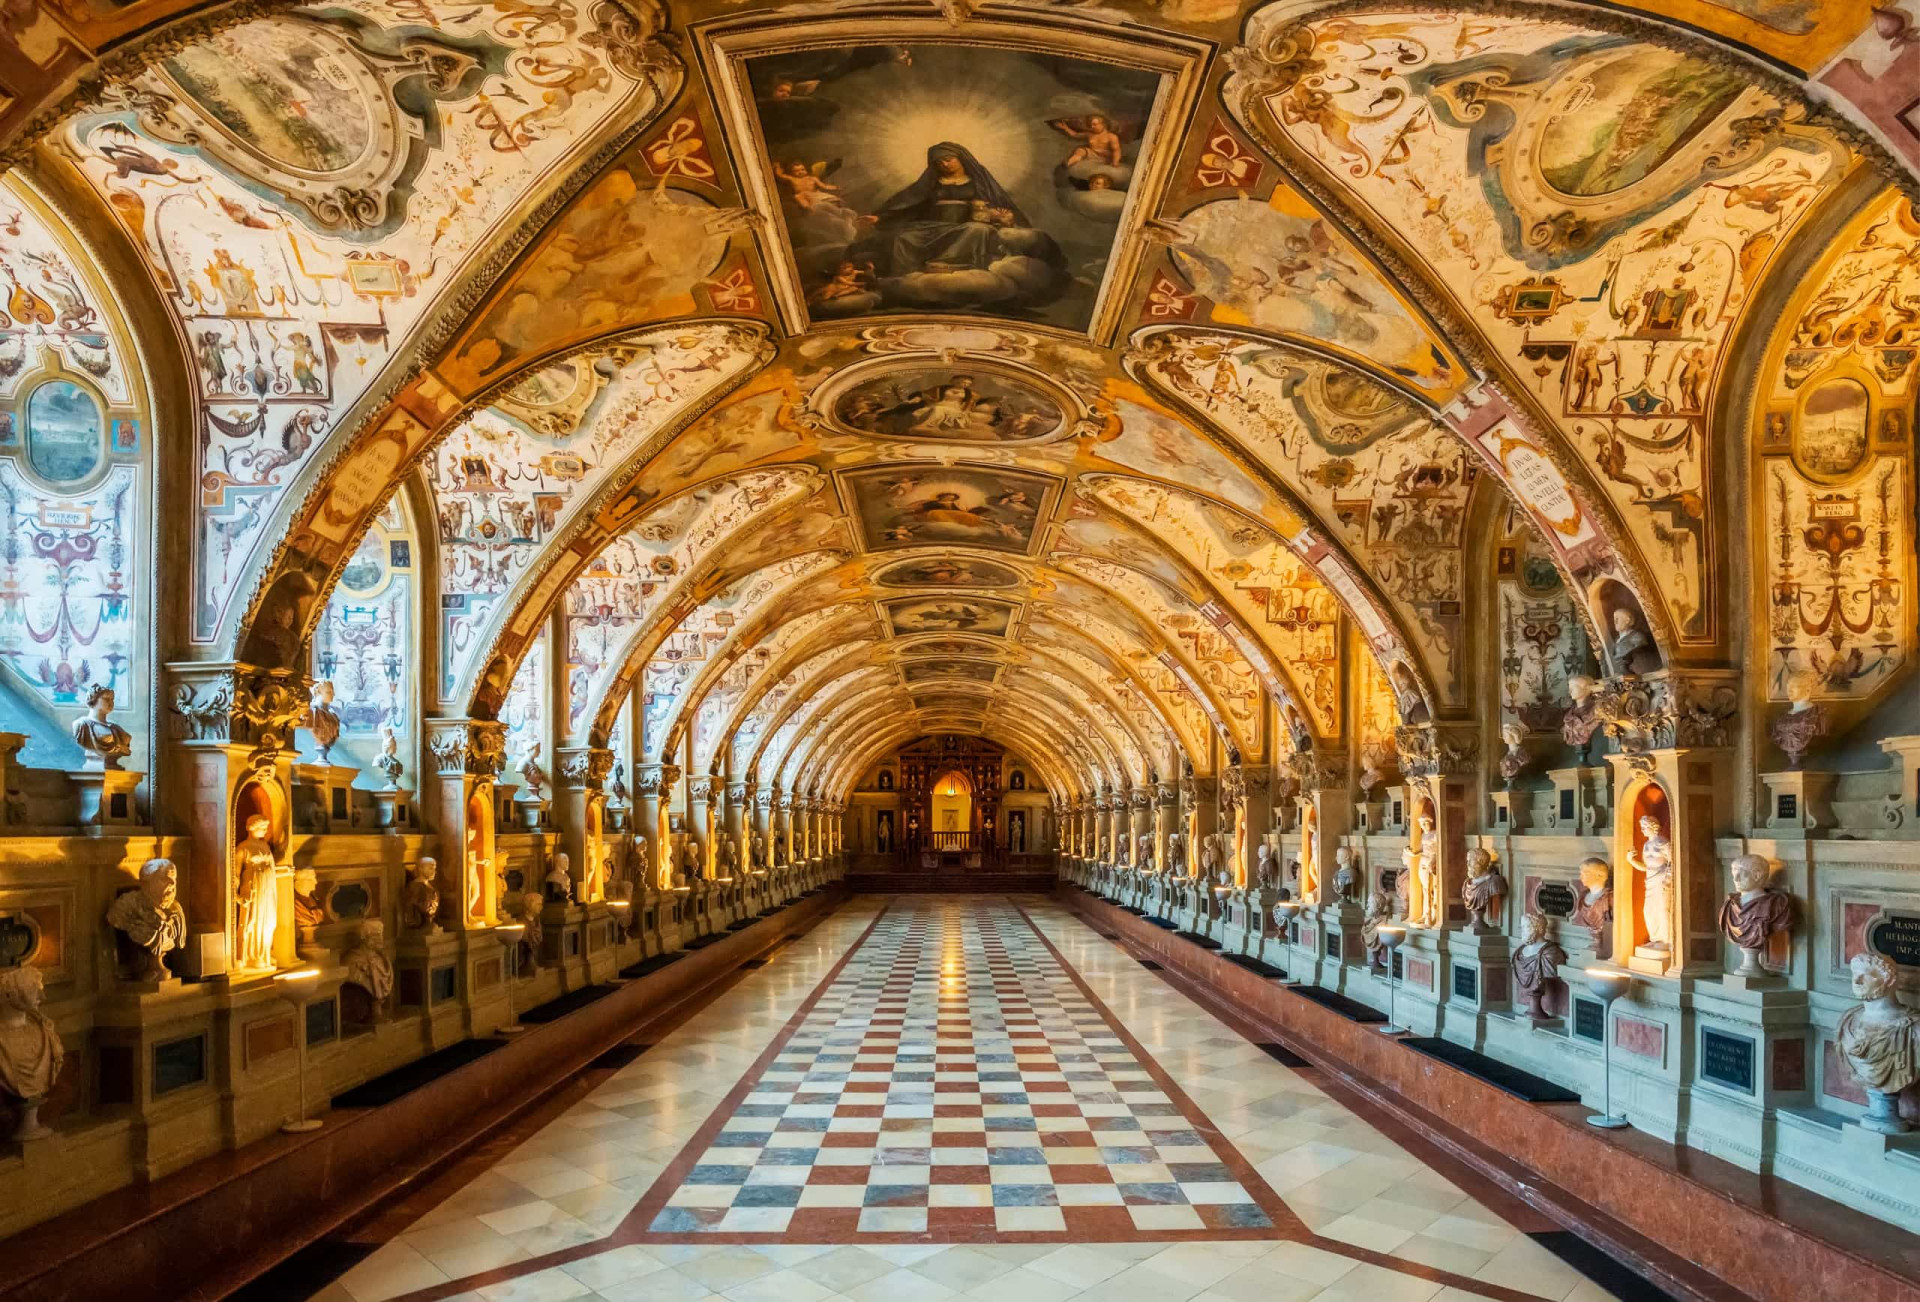 <p>Munich's architectural riches include the Residenz, the former royal palace of the Bavarian monarchs. The complex of buildings are noted for their opulent decoration and displays from the former royal collections.</p><p>You may also like:<a href="https://www.starsinsider.com/n/423240?utm_source=msn.com&utm_medium=display&utm_campaign=referral_description&utm_content=481885v1en-us"> Nasty comments celebs made about their exes</a></p>